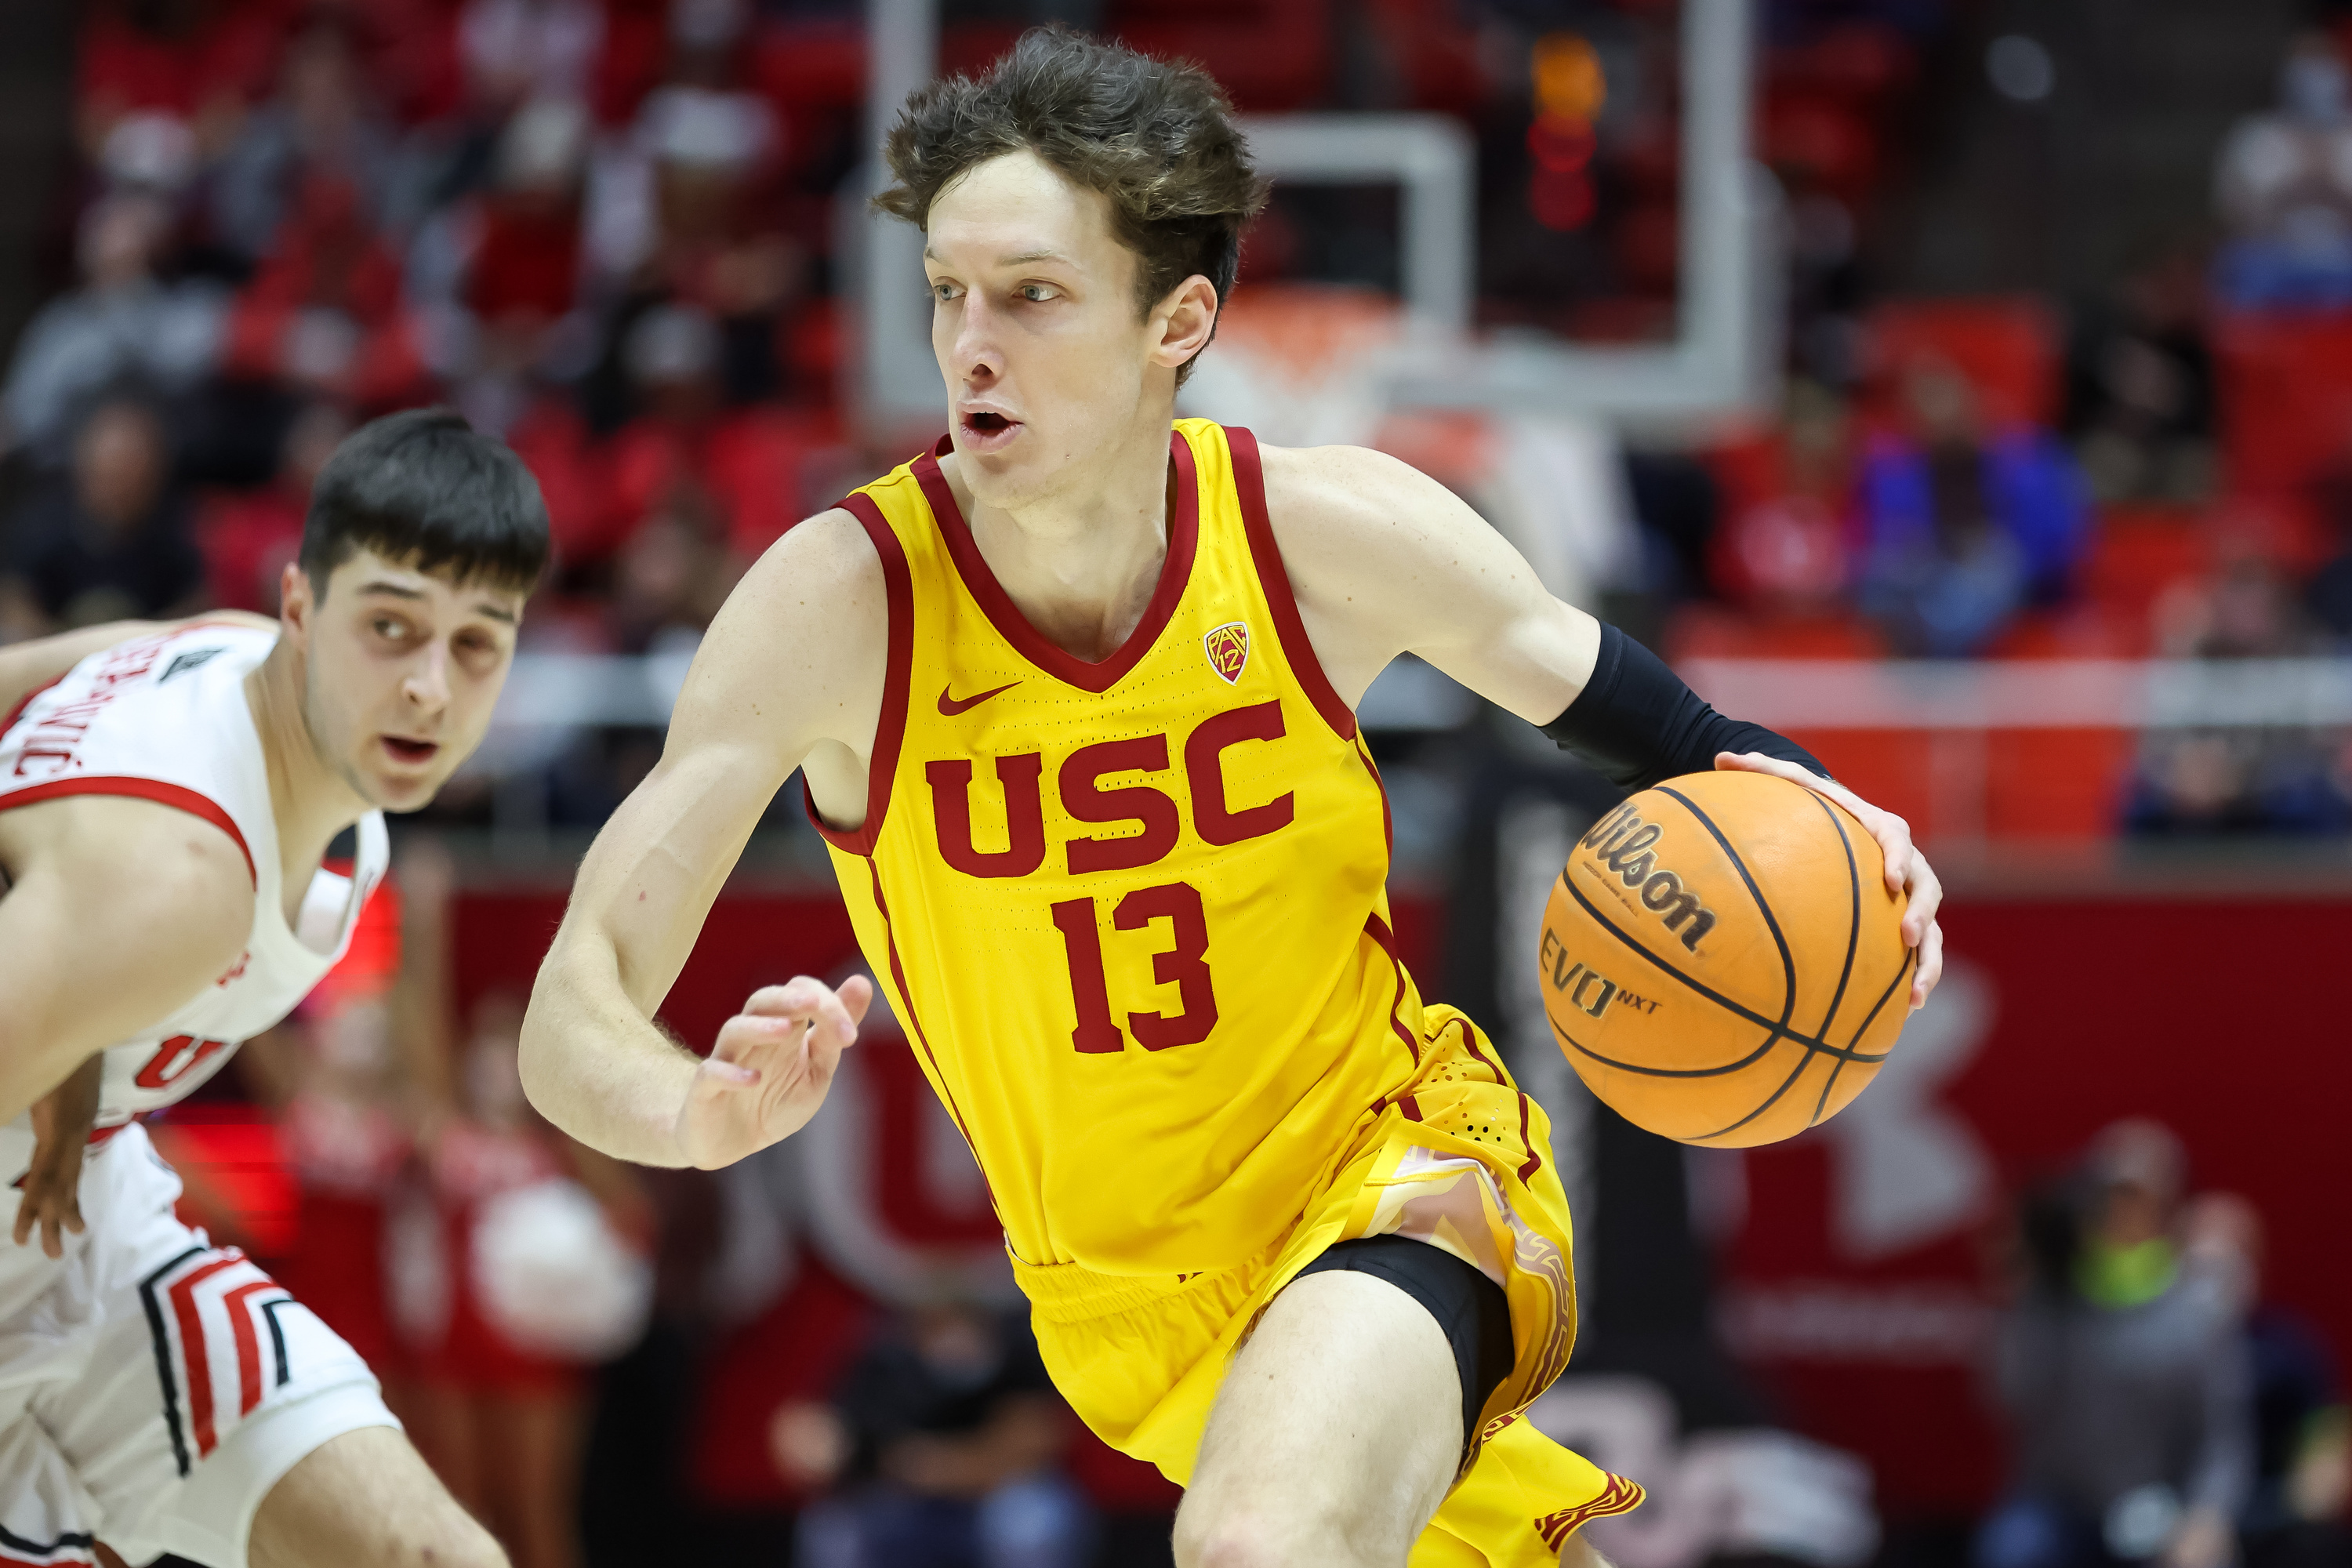 USC guard Drew Peterson scored a game-high 23 points Saturday as the No. 16 Trojans dropped Utah 79-67 at the Huntsman Center.